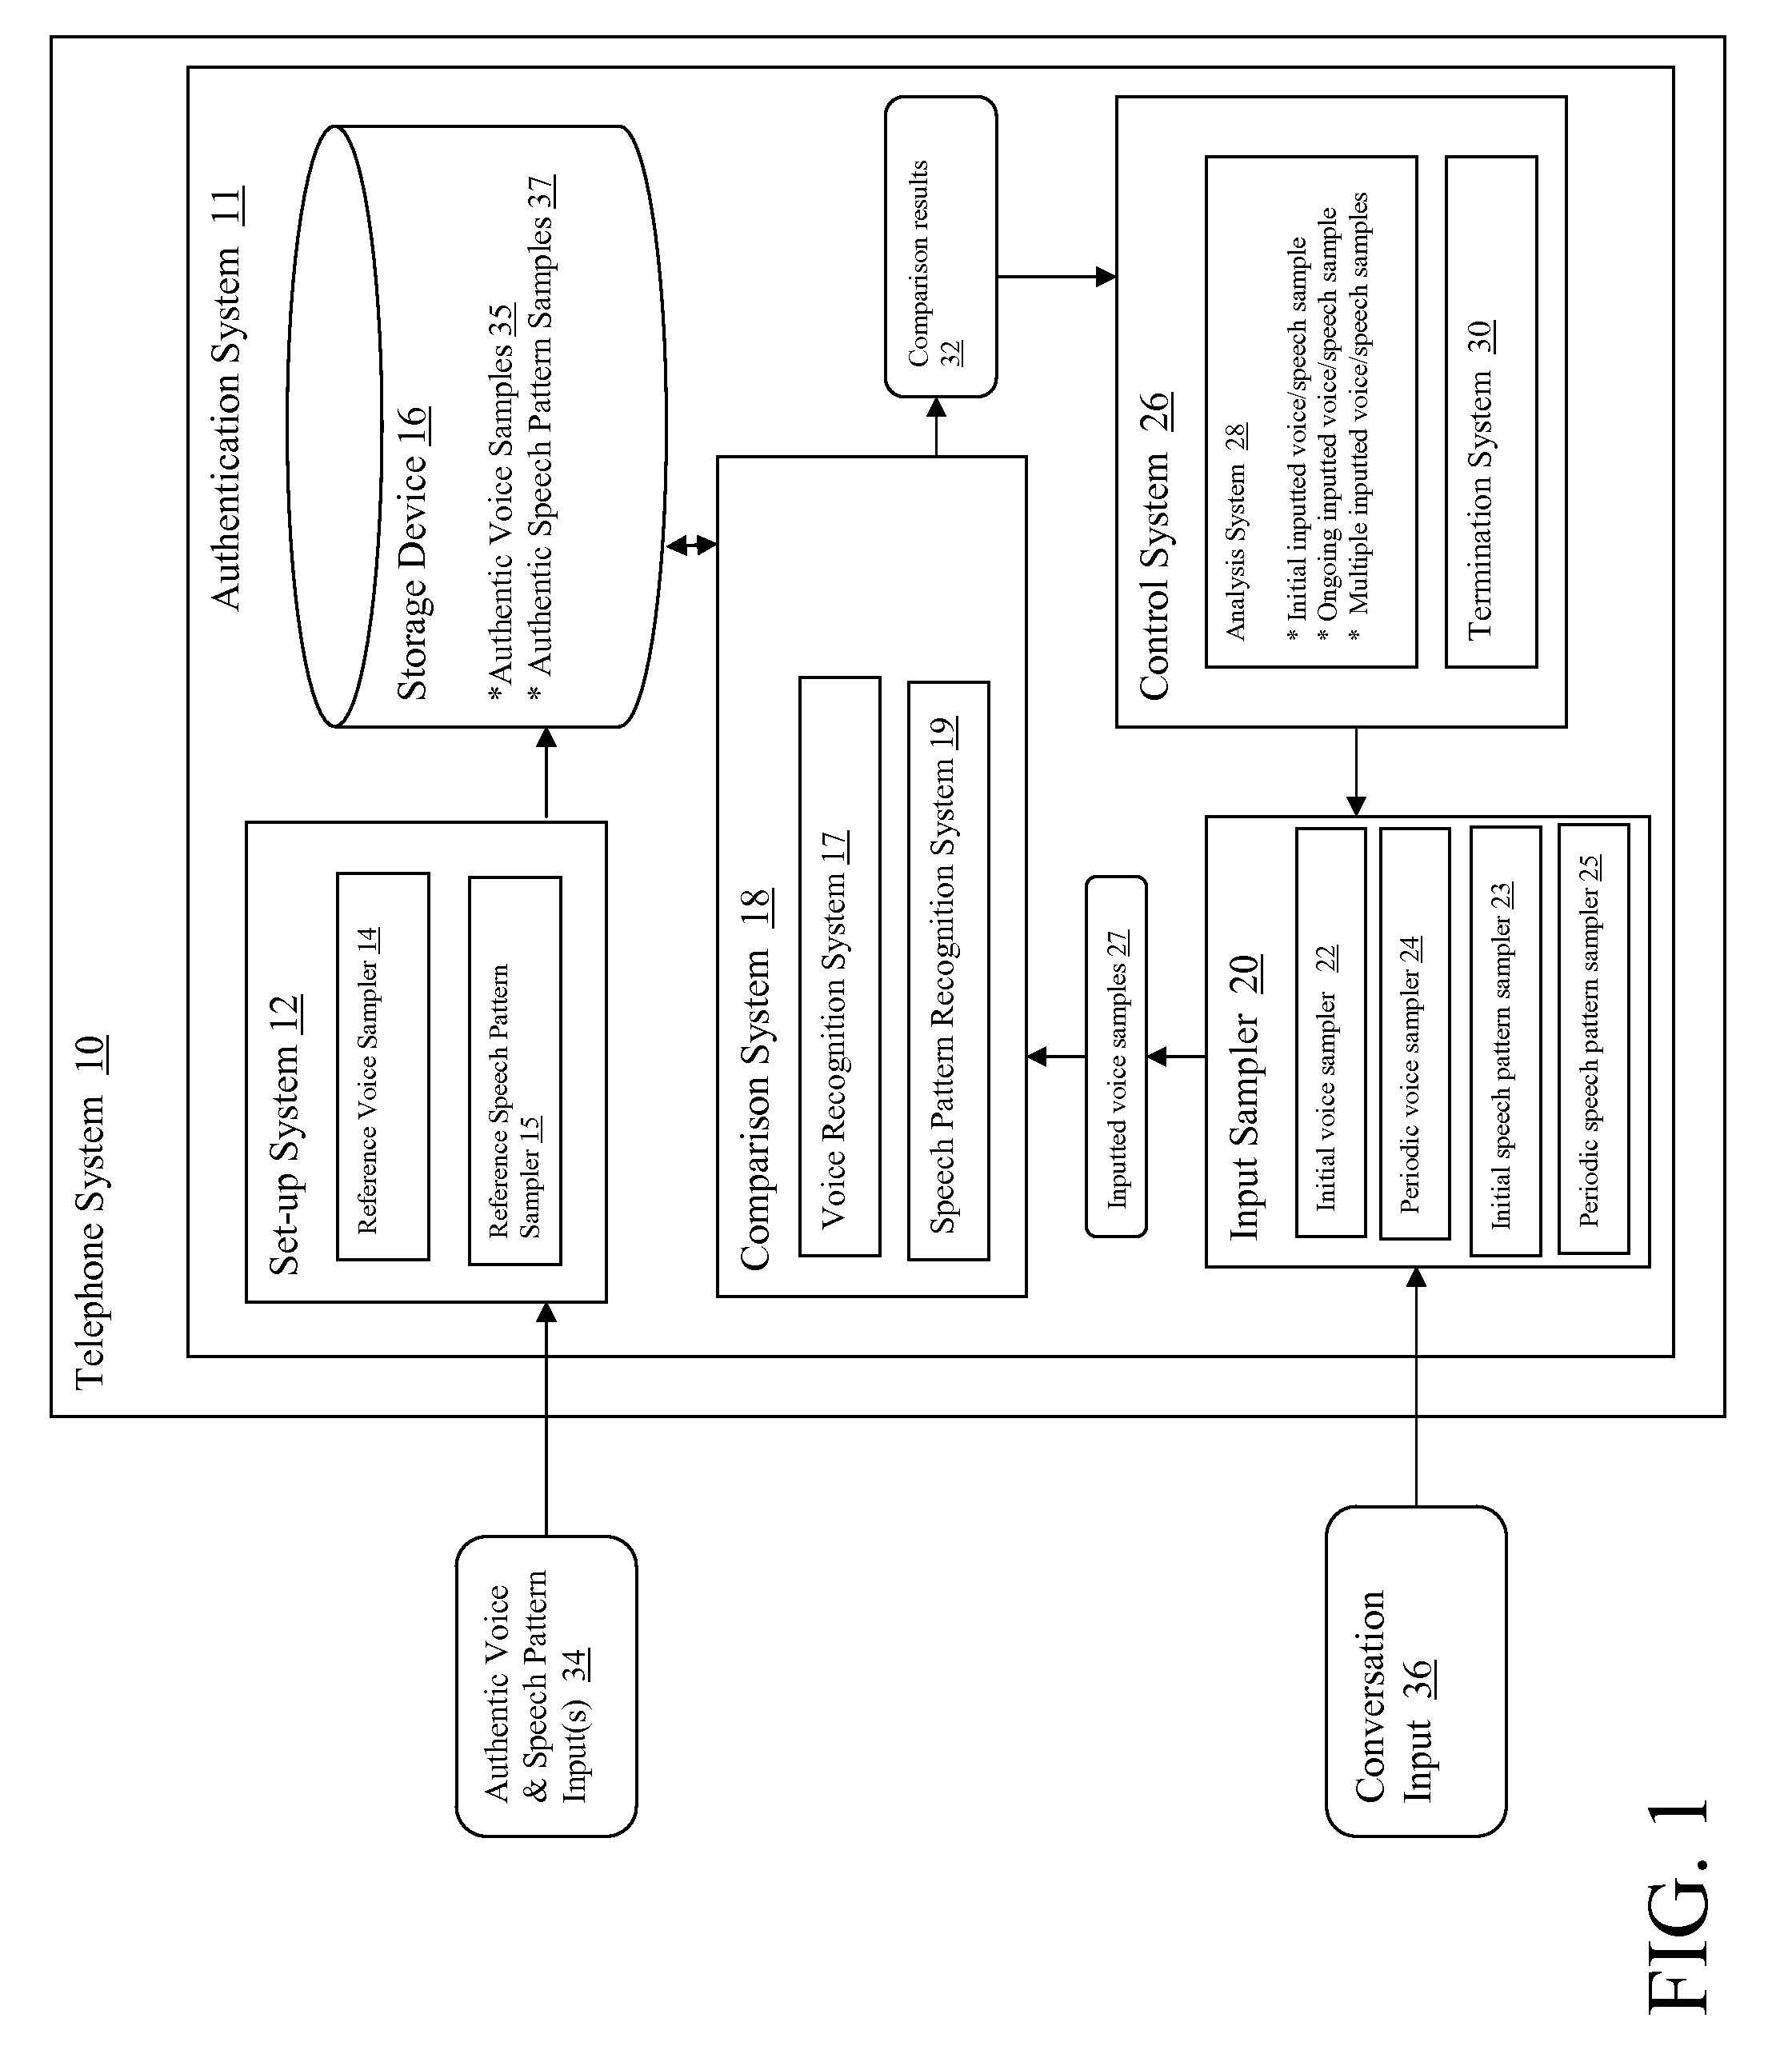 System and method for telephonic voice and speech authentication